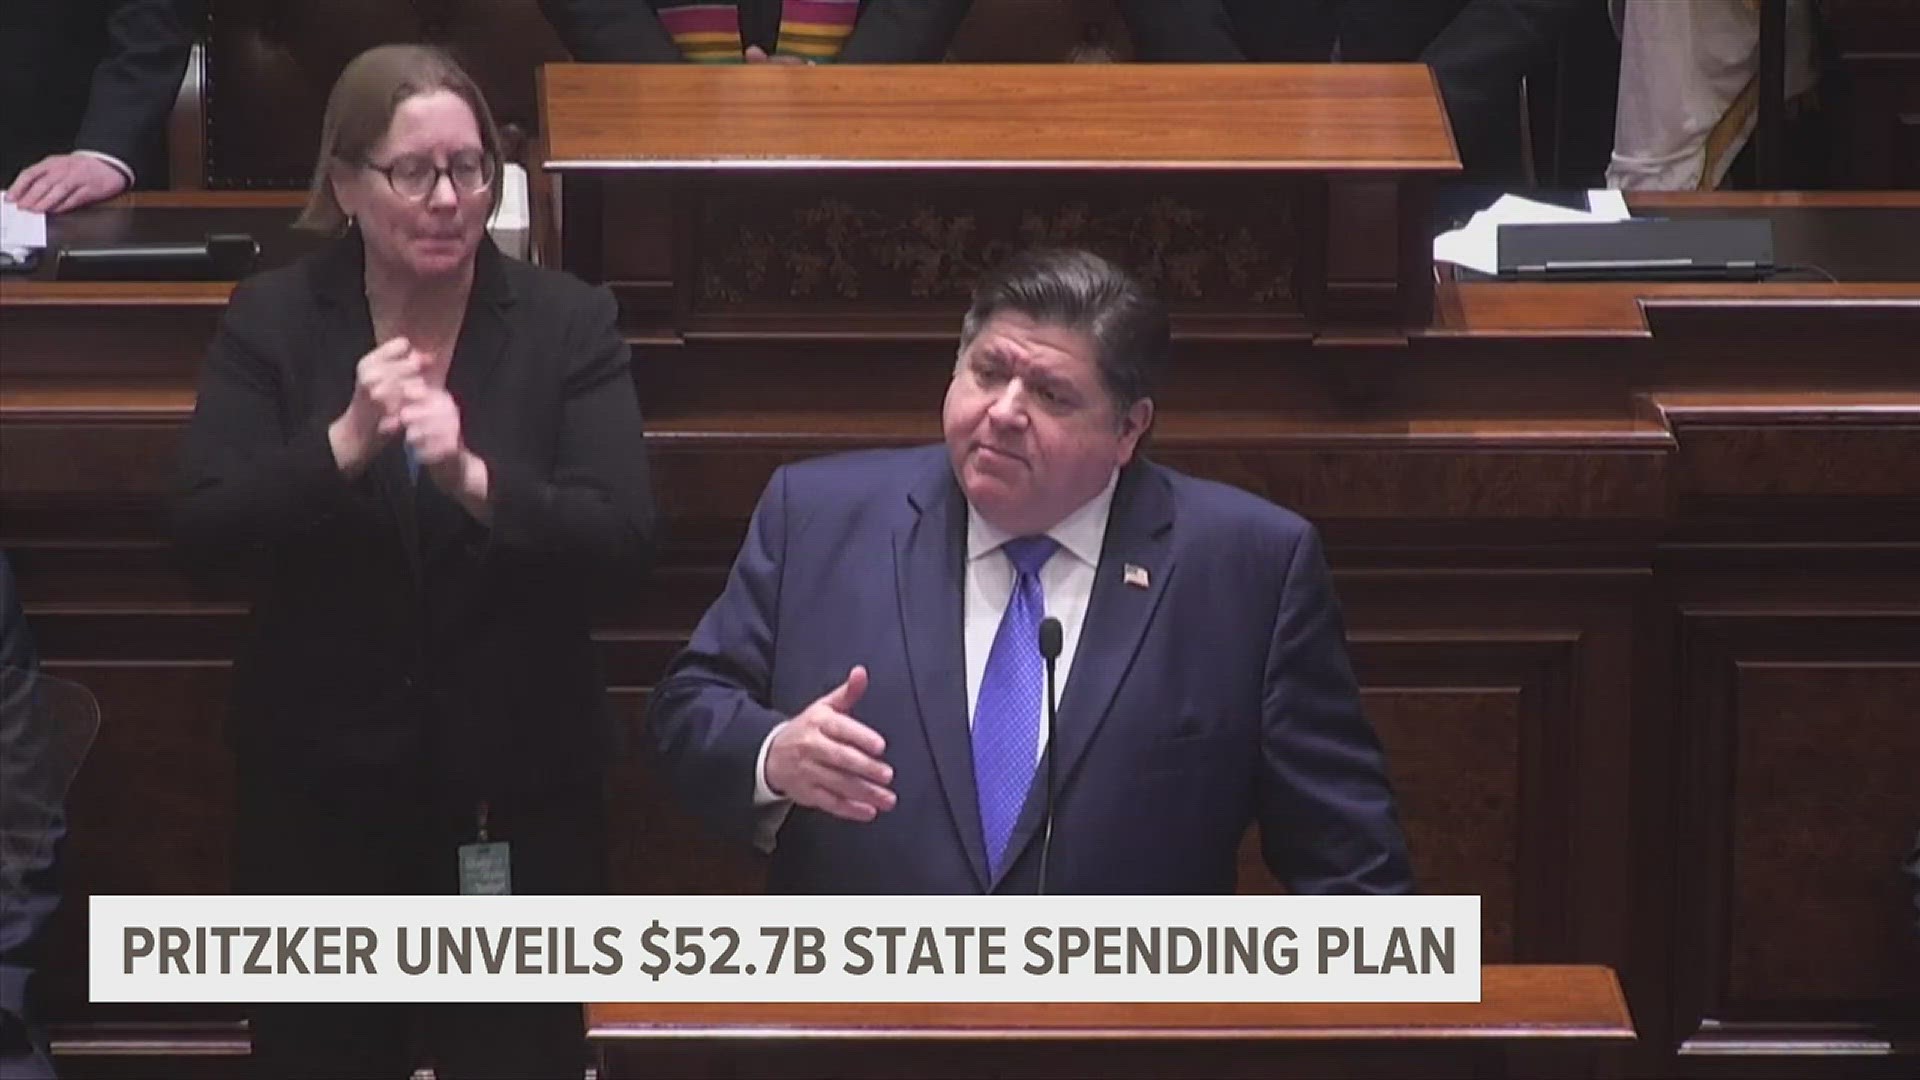 Pritzker outlined a $53 billion spending plan, including $182 million to help incoming migrants.